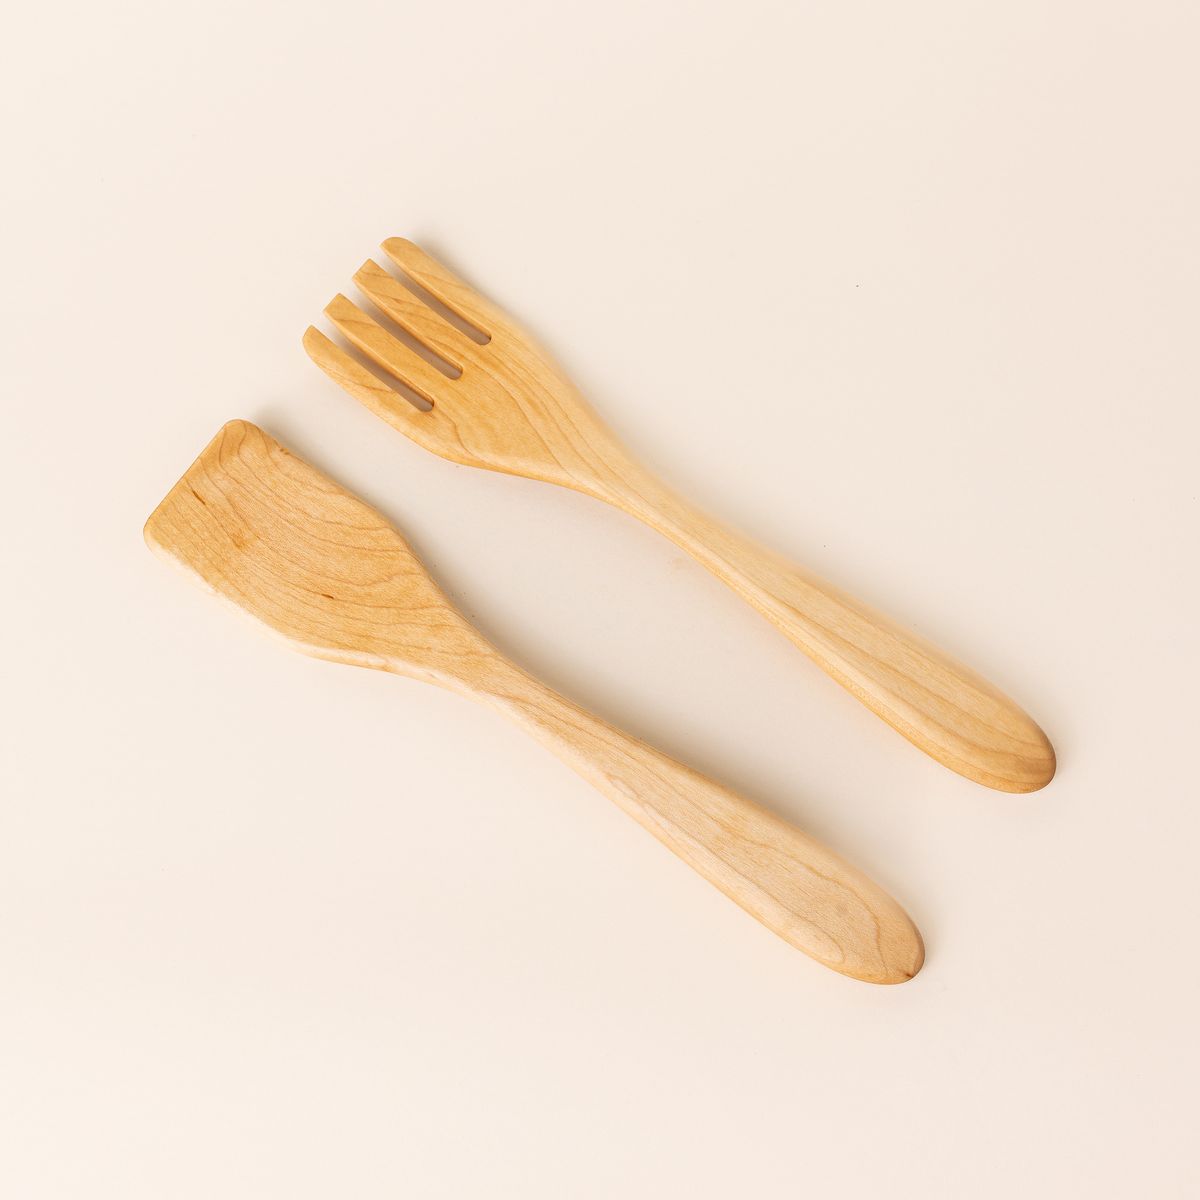 Two long maple wood serving utensils. The left utensil has a shape like a spatula, the right has a shape like a fork.